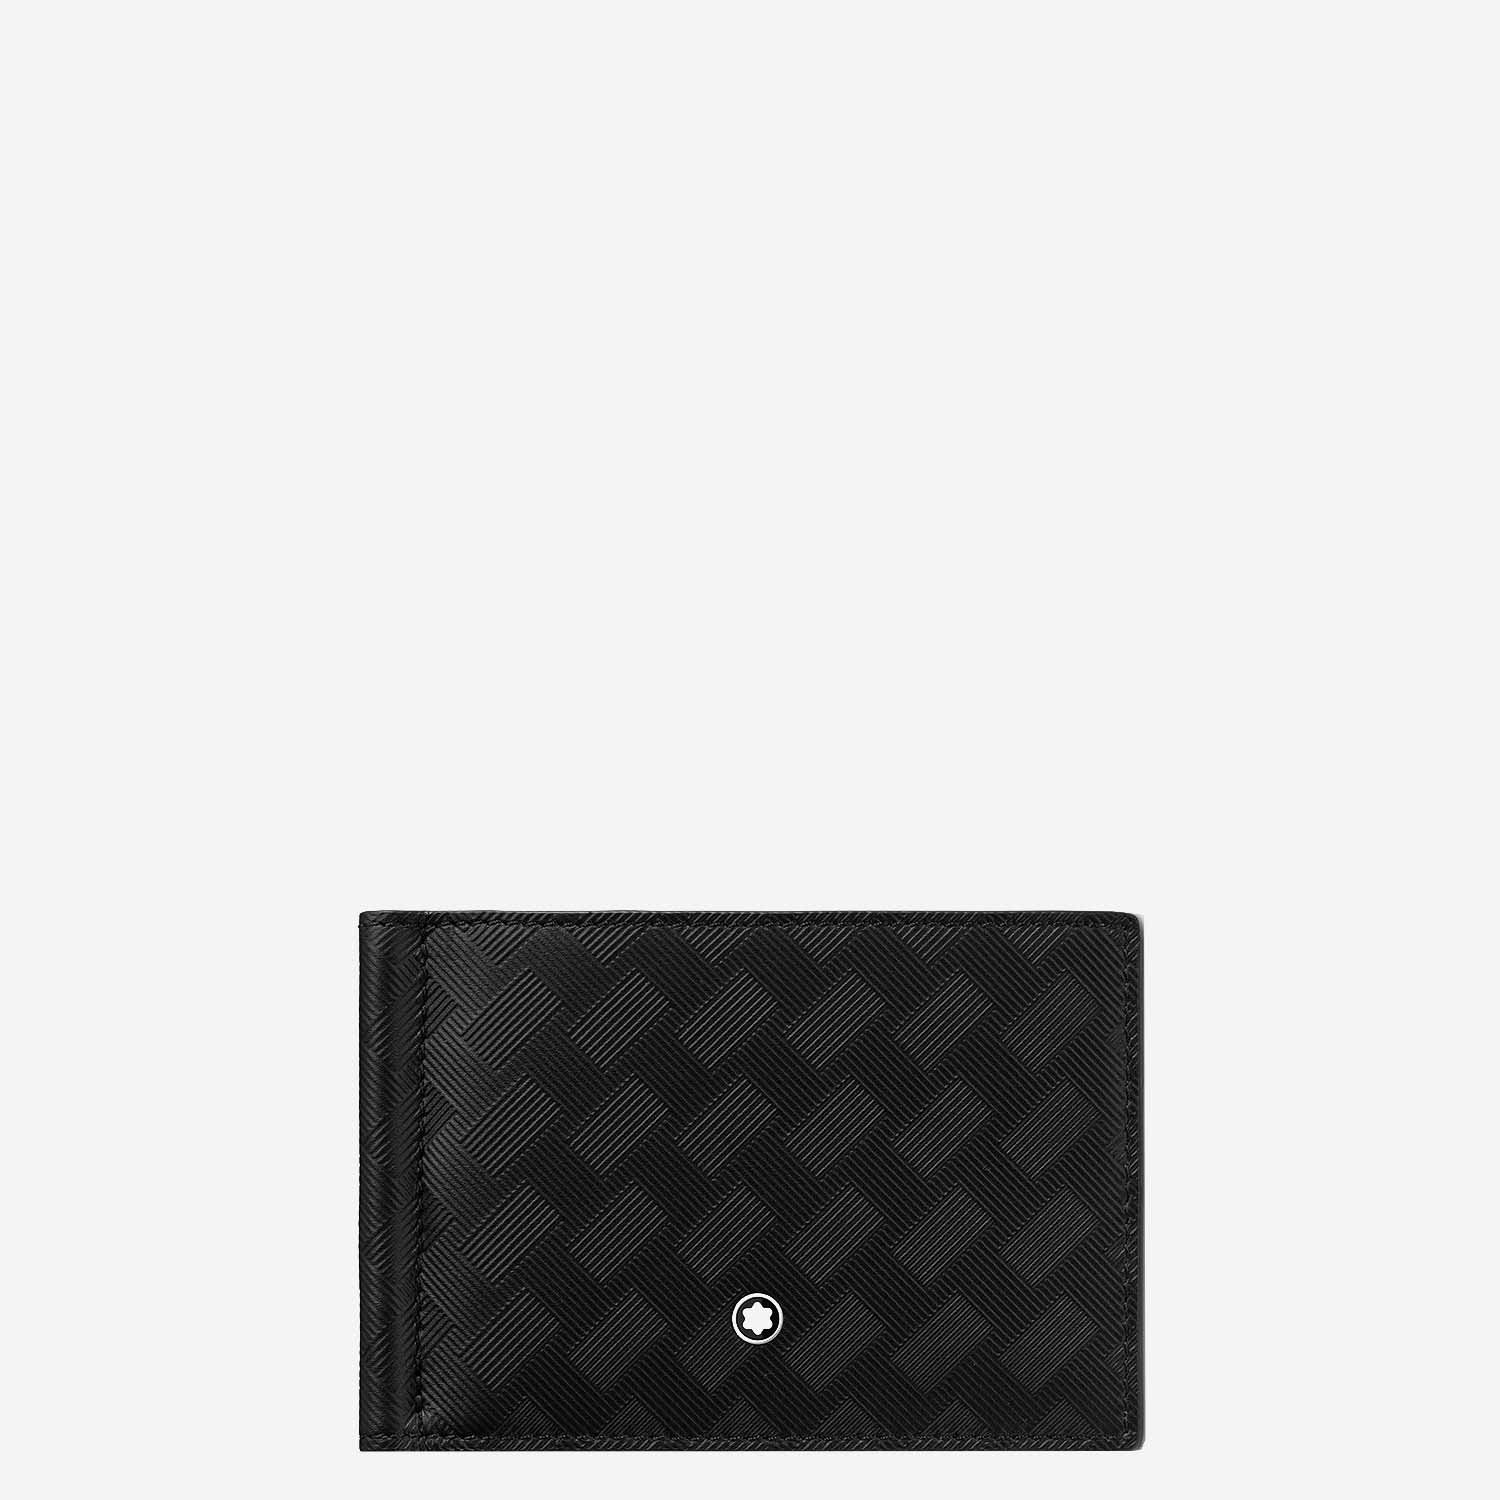 montblanc extreme 3.0 6 compartment wallet with money clip